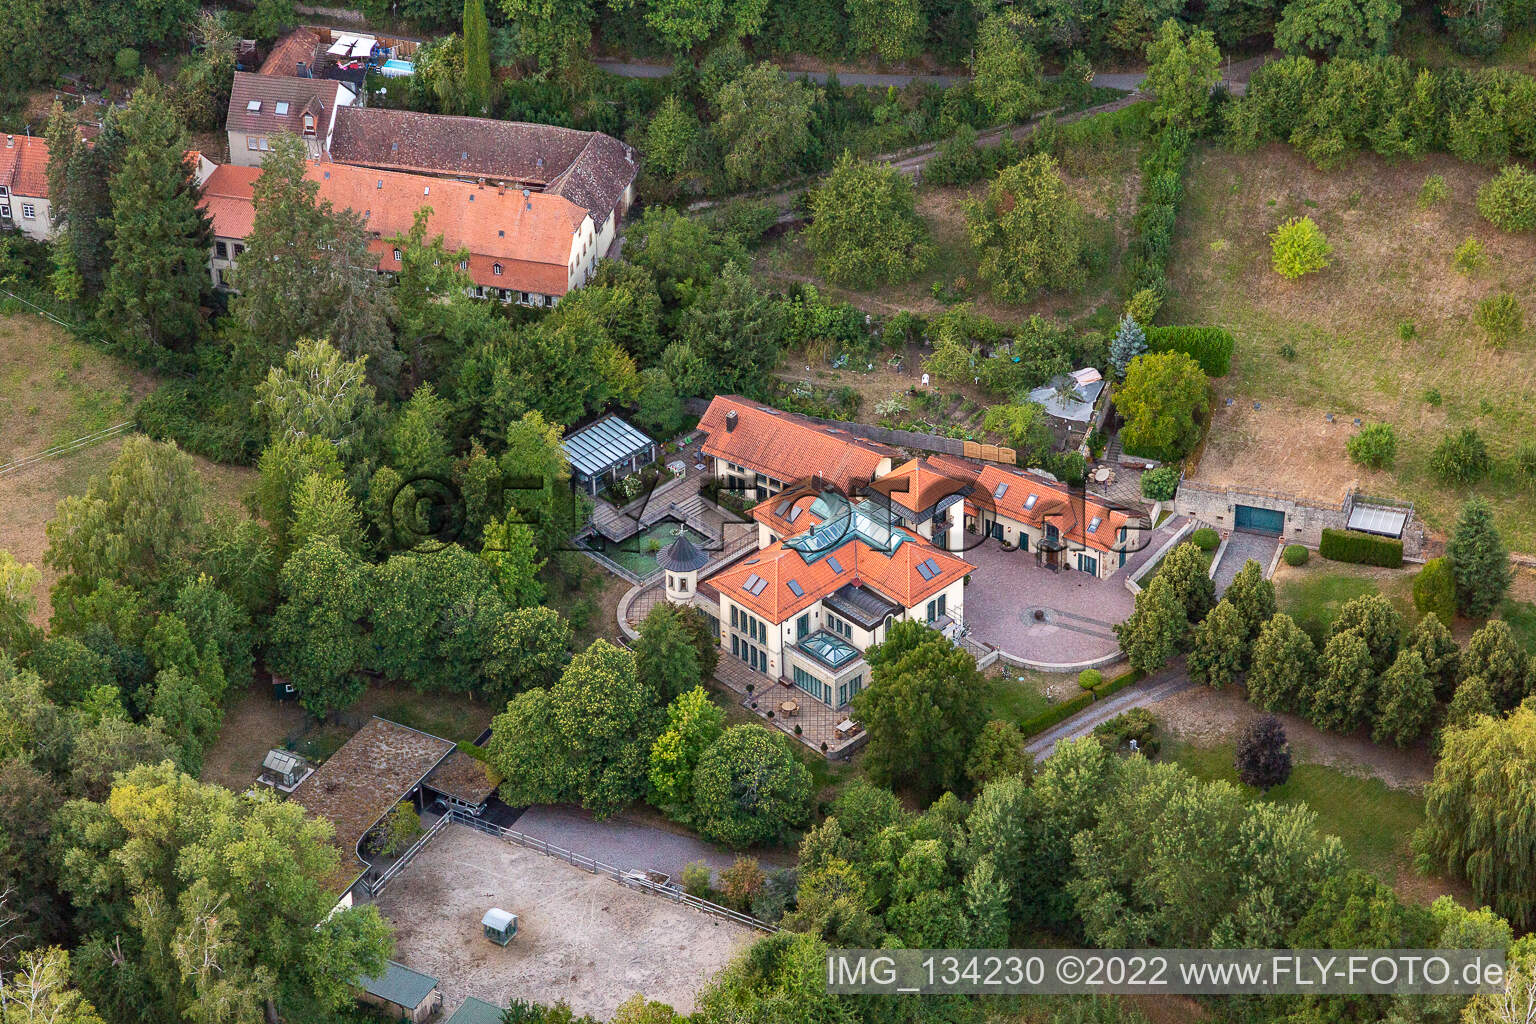 Aerial view of Villa on Hainbach in Gleisweiler in the state Rhineland-Palatinate, Germany